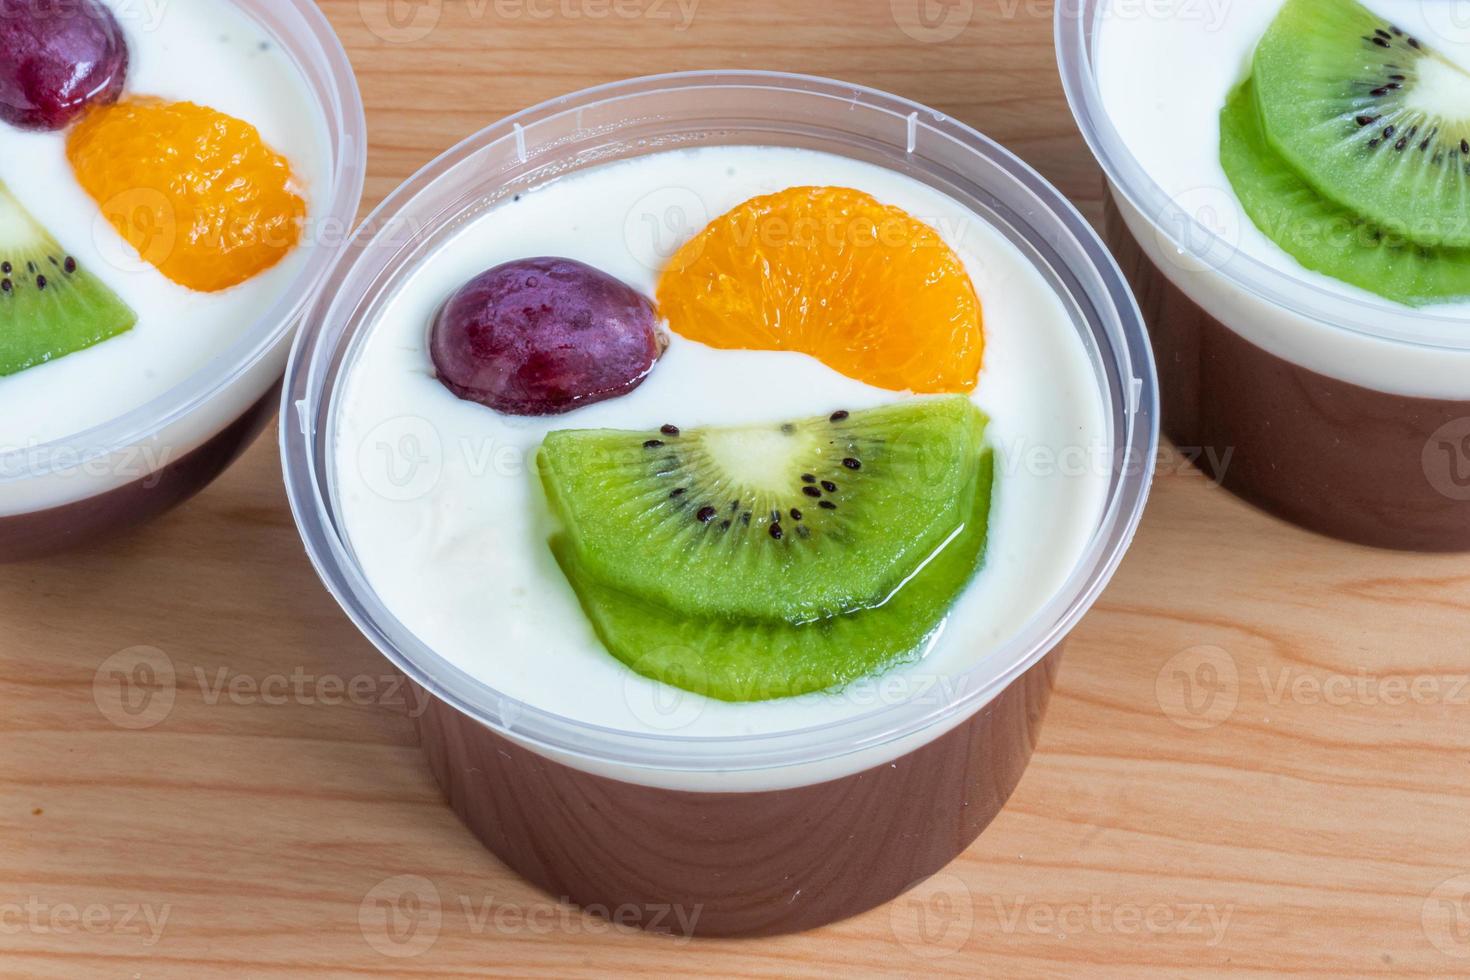 Fruity milk pudding, sweet chocolate silk pudding dessert with fruit topping photo